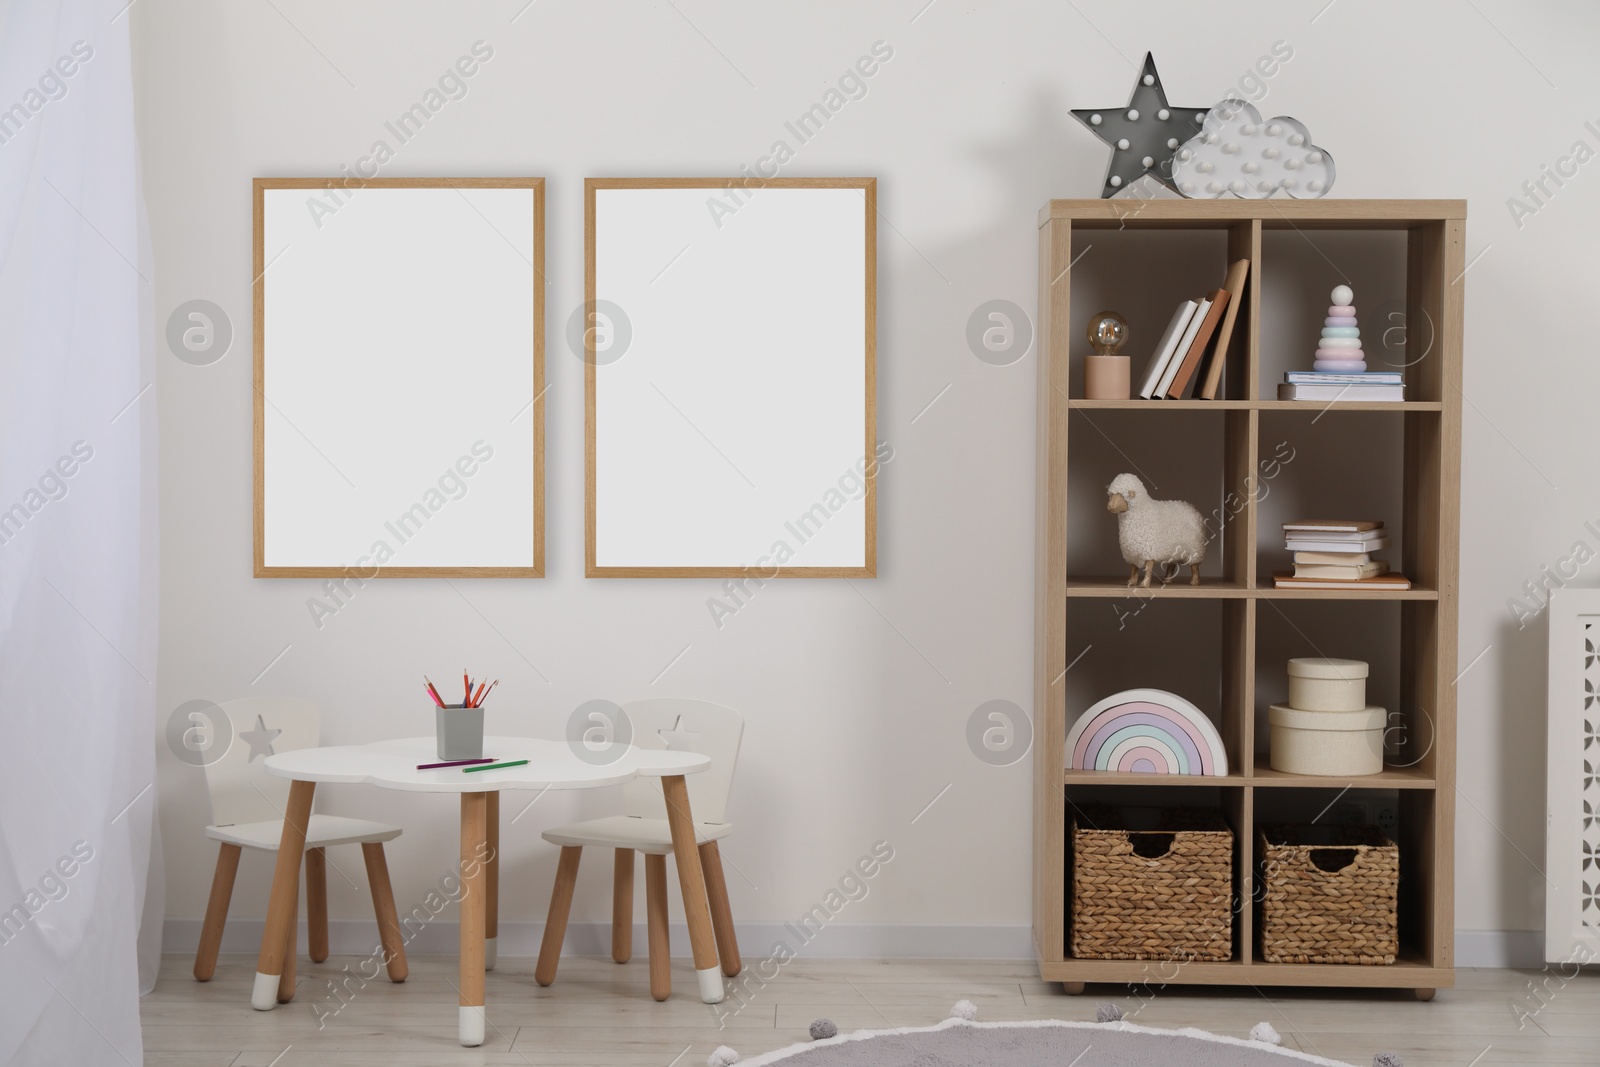 Image of Room for child with blank pictures on wall. Interior design